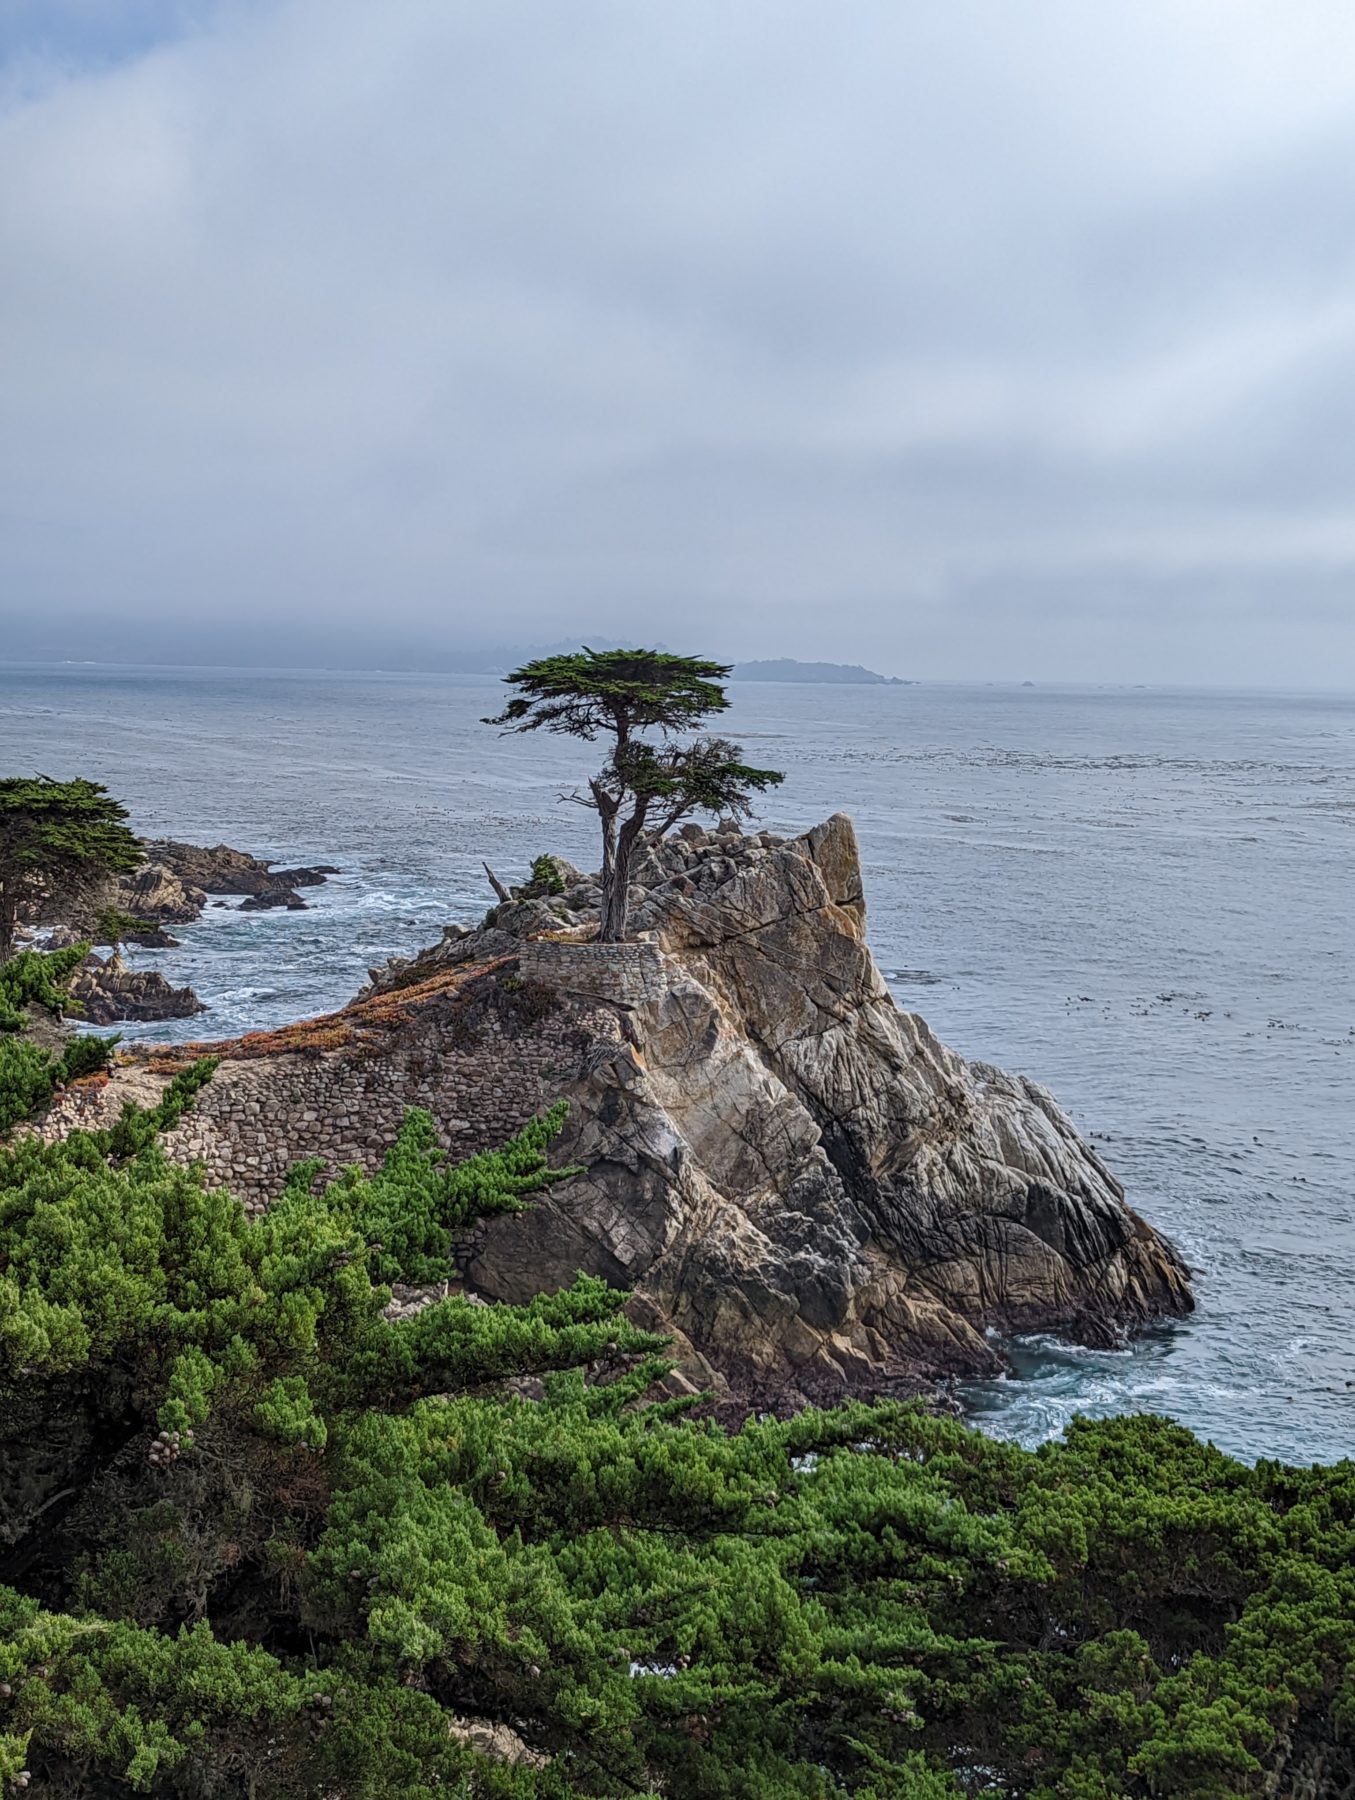 17 mile drive itinerary - the Lone Cypress